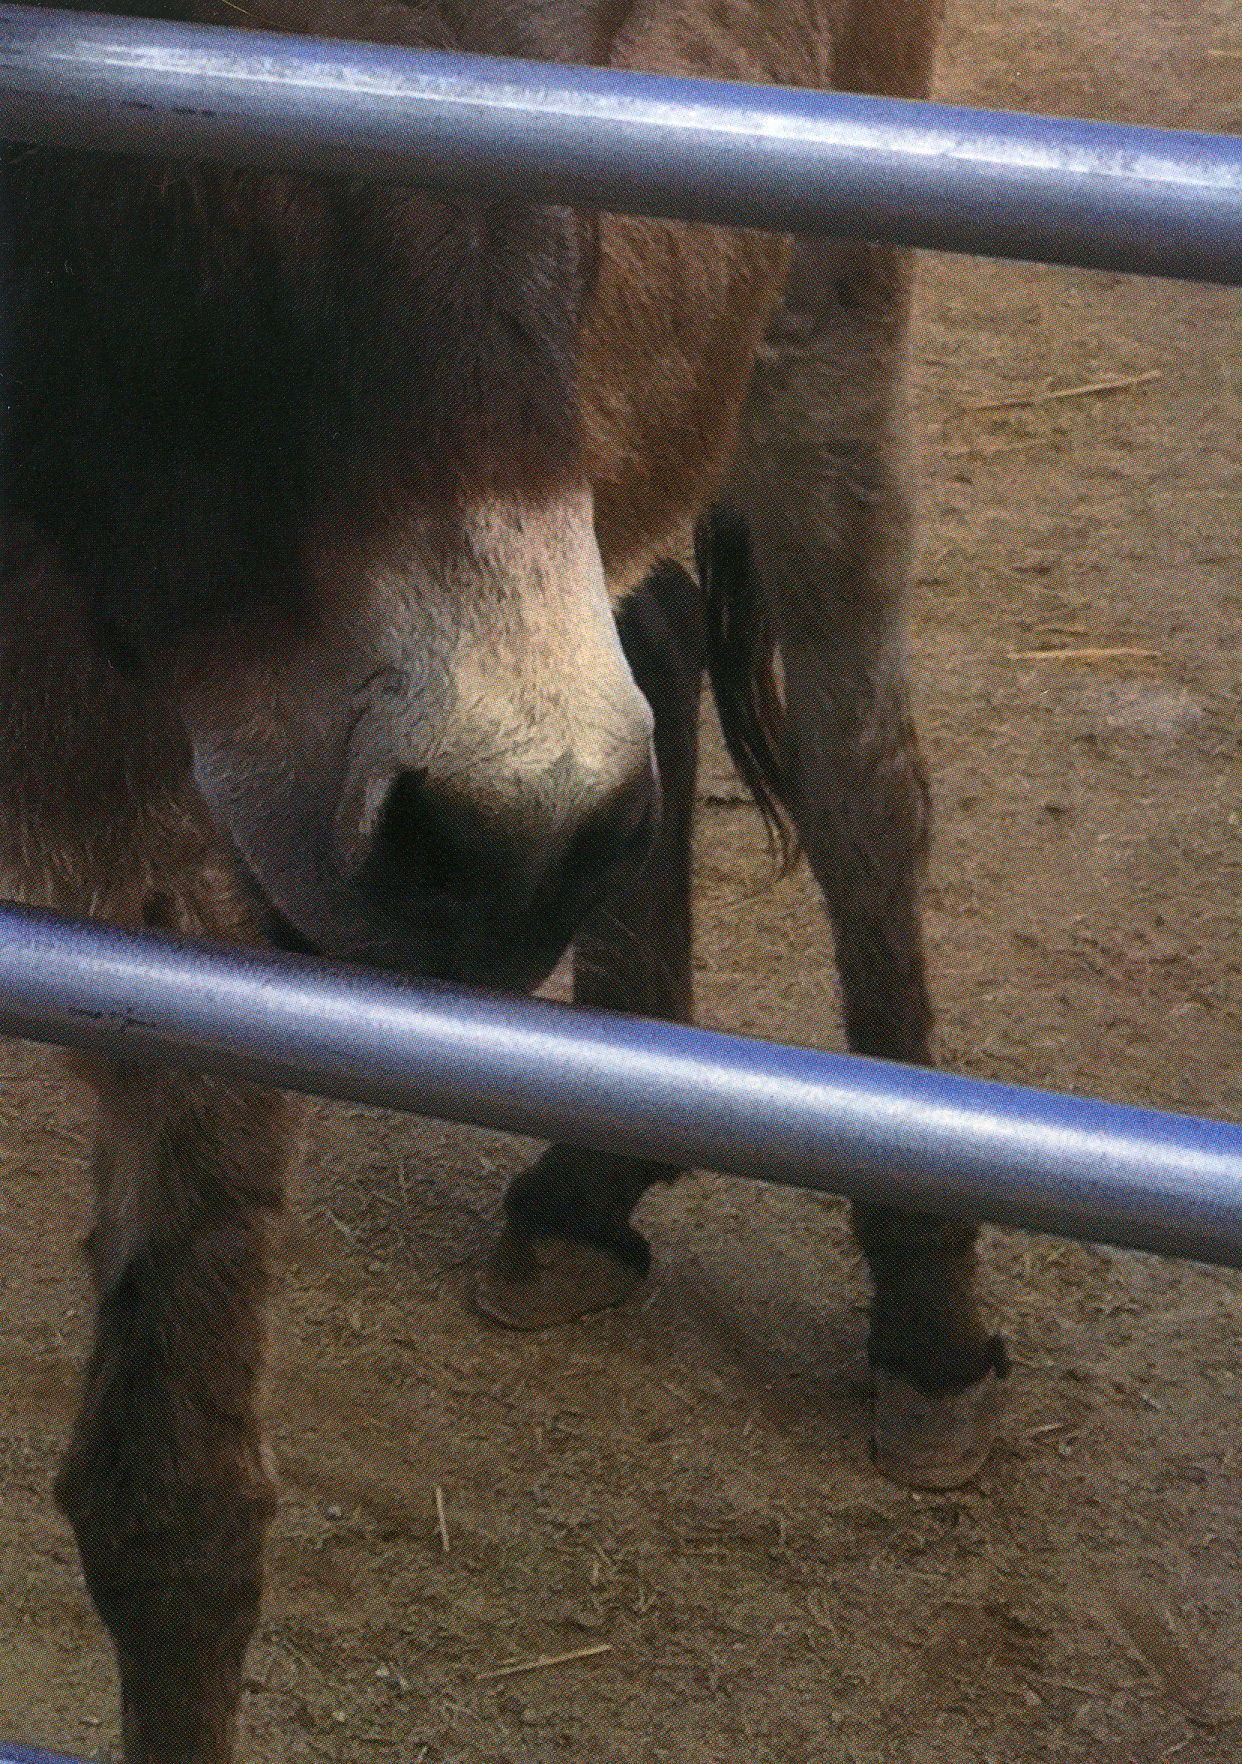 A picture of a donkey.